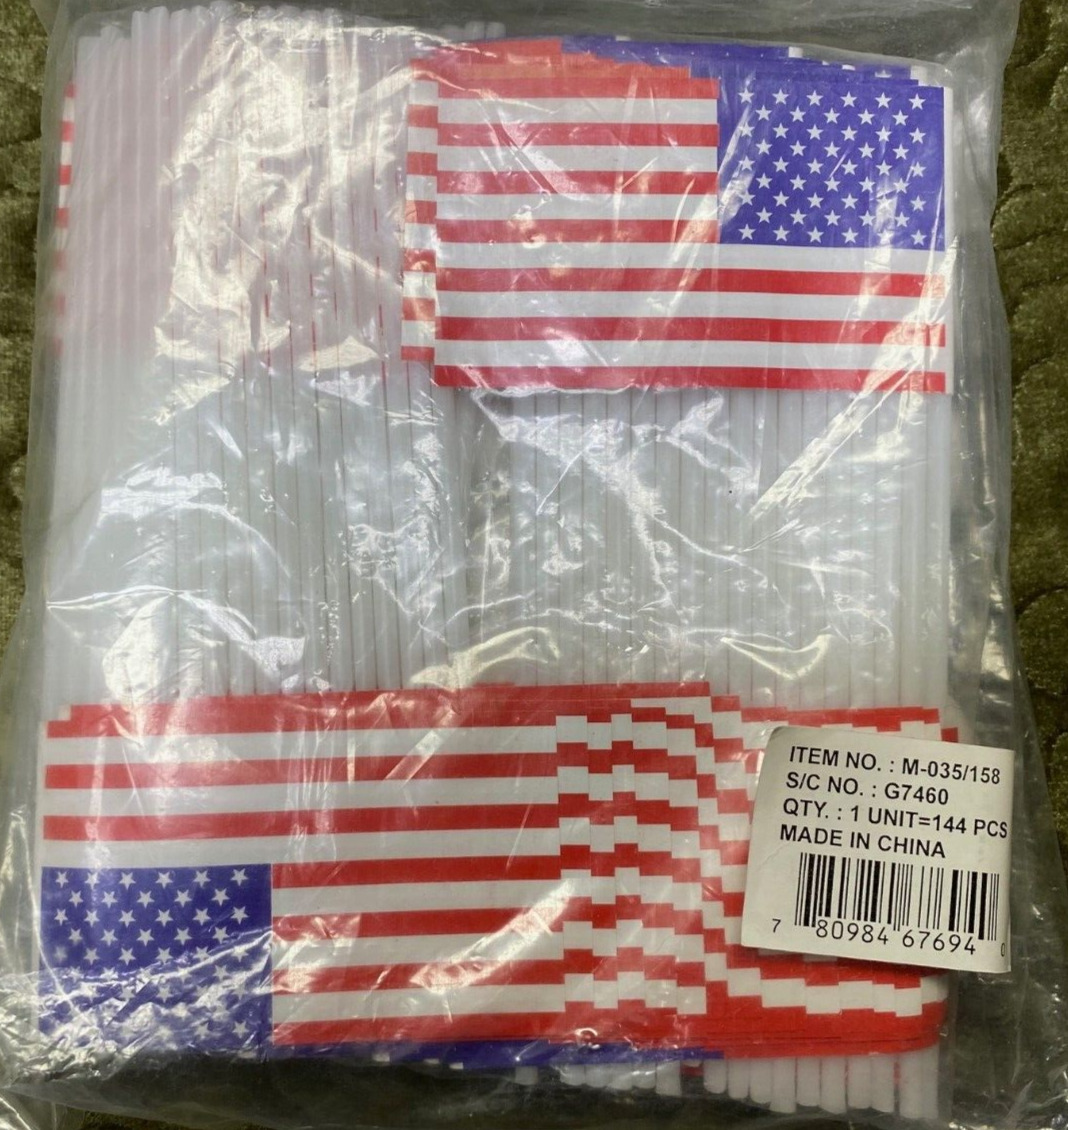 144 COUNT OF UNITED STATES USA FLAGS WITH HOLDERS IN SEALED BAG M-035/158 G7460